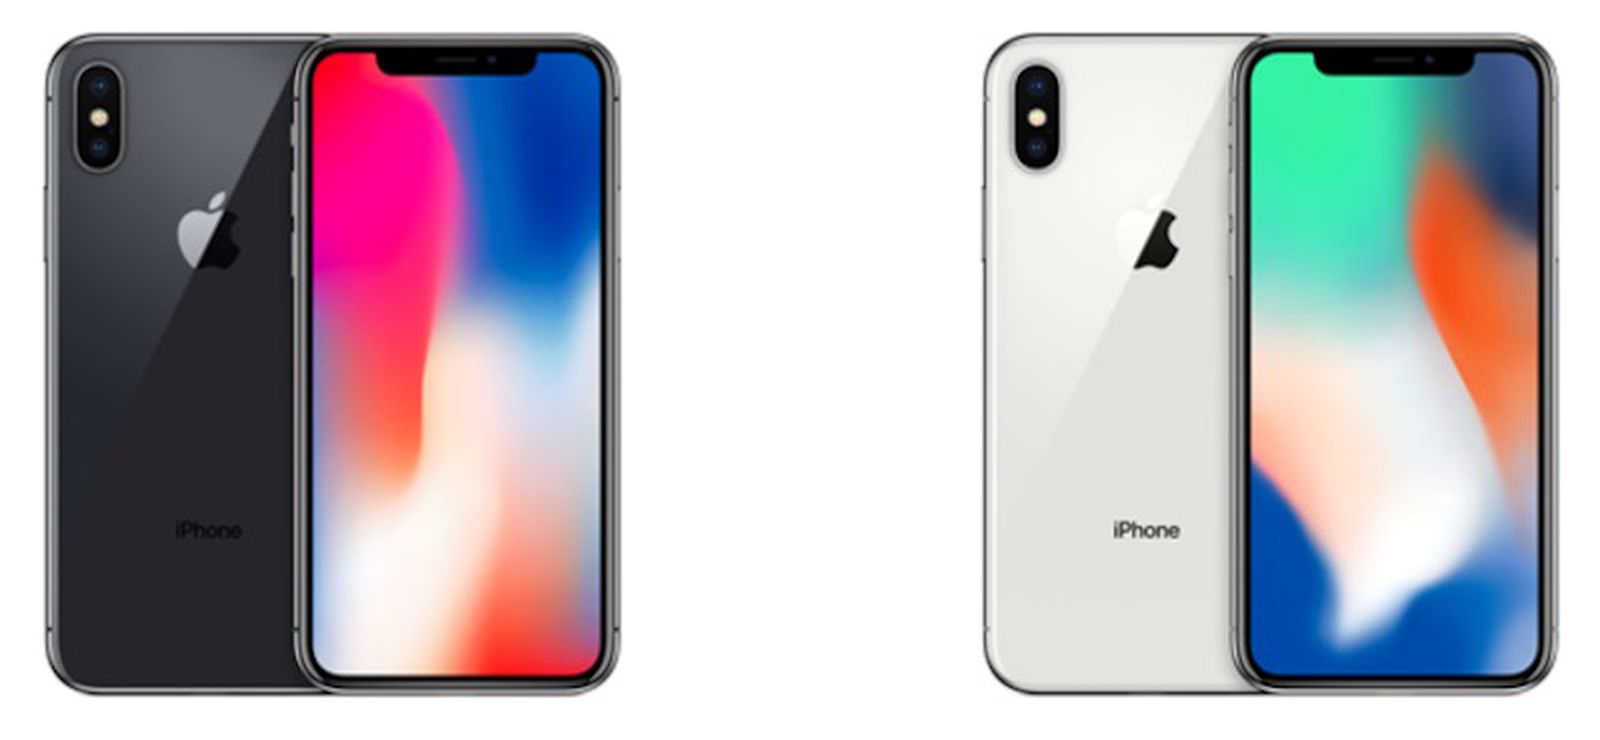 iPhone X Comes Only in Space Gray and Silver With No Sign of Gold ...